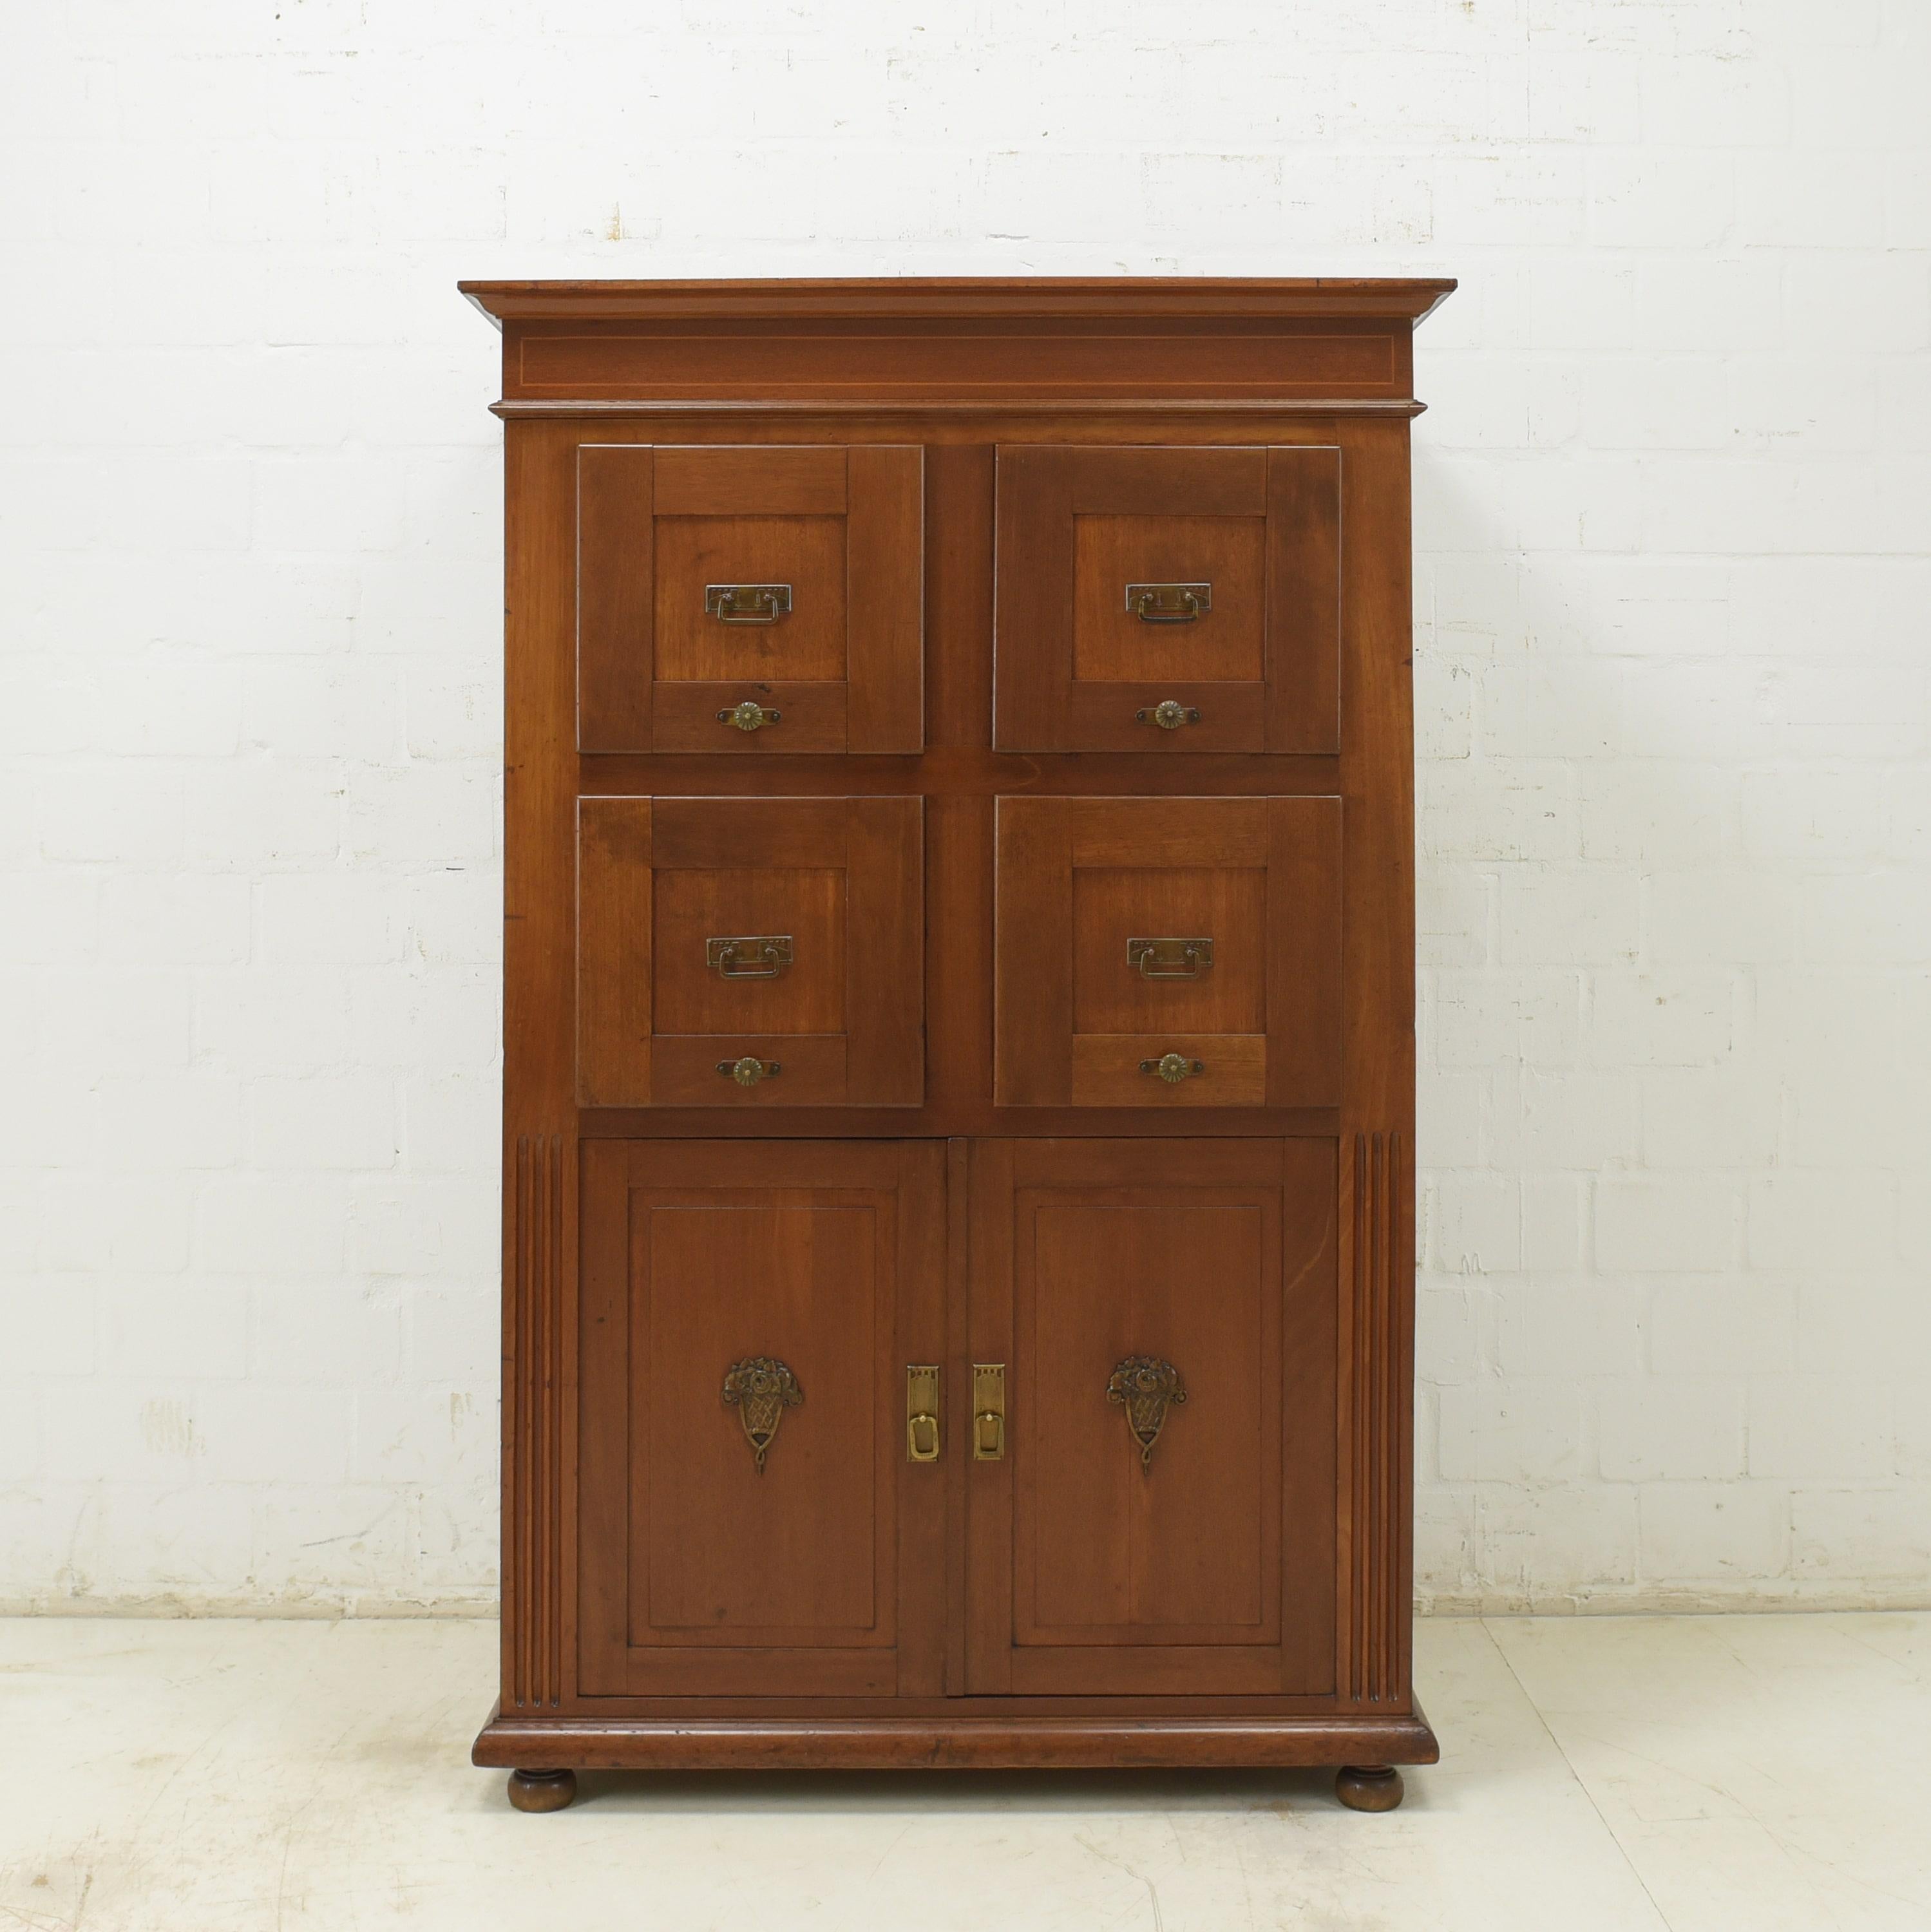 Drawer cabinet restored Art Deco around 1925 Vertiko filing cabinet

Features:
Four large file drawers and two doors below
Removable drawer bottoms subsequently made from plywood
High quality
Original handles and applications
Inner dimensions